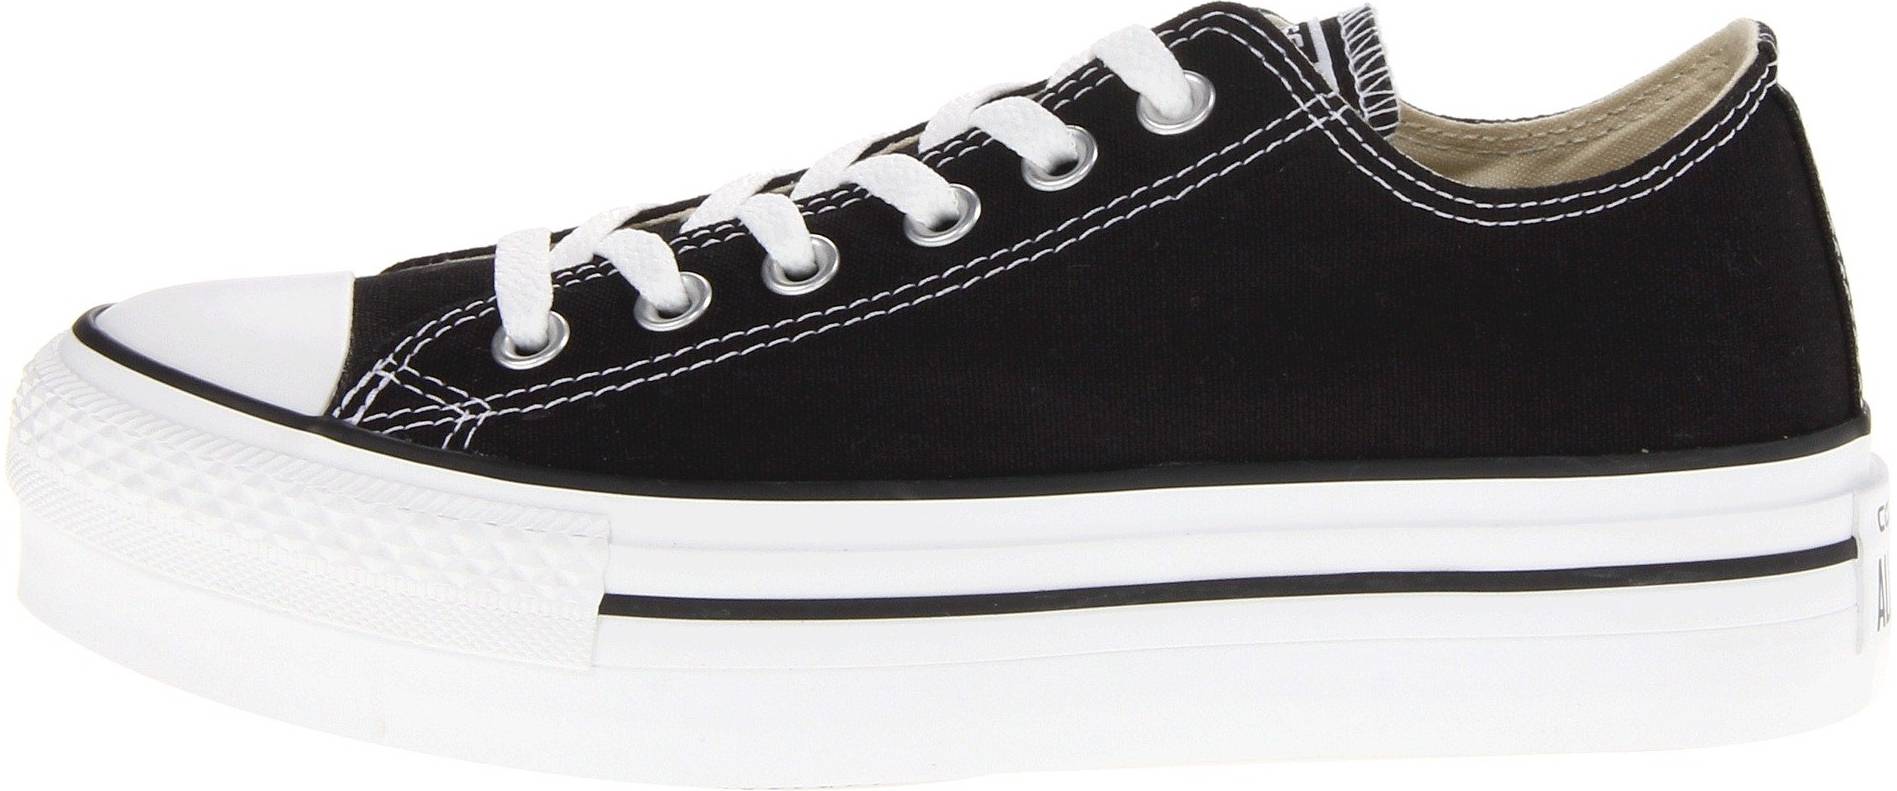 Converse Platform Limited Edition Flash Sales, UP TO 52% OFF | www ... بخاخ مخملي